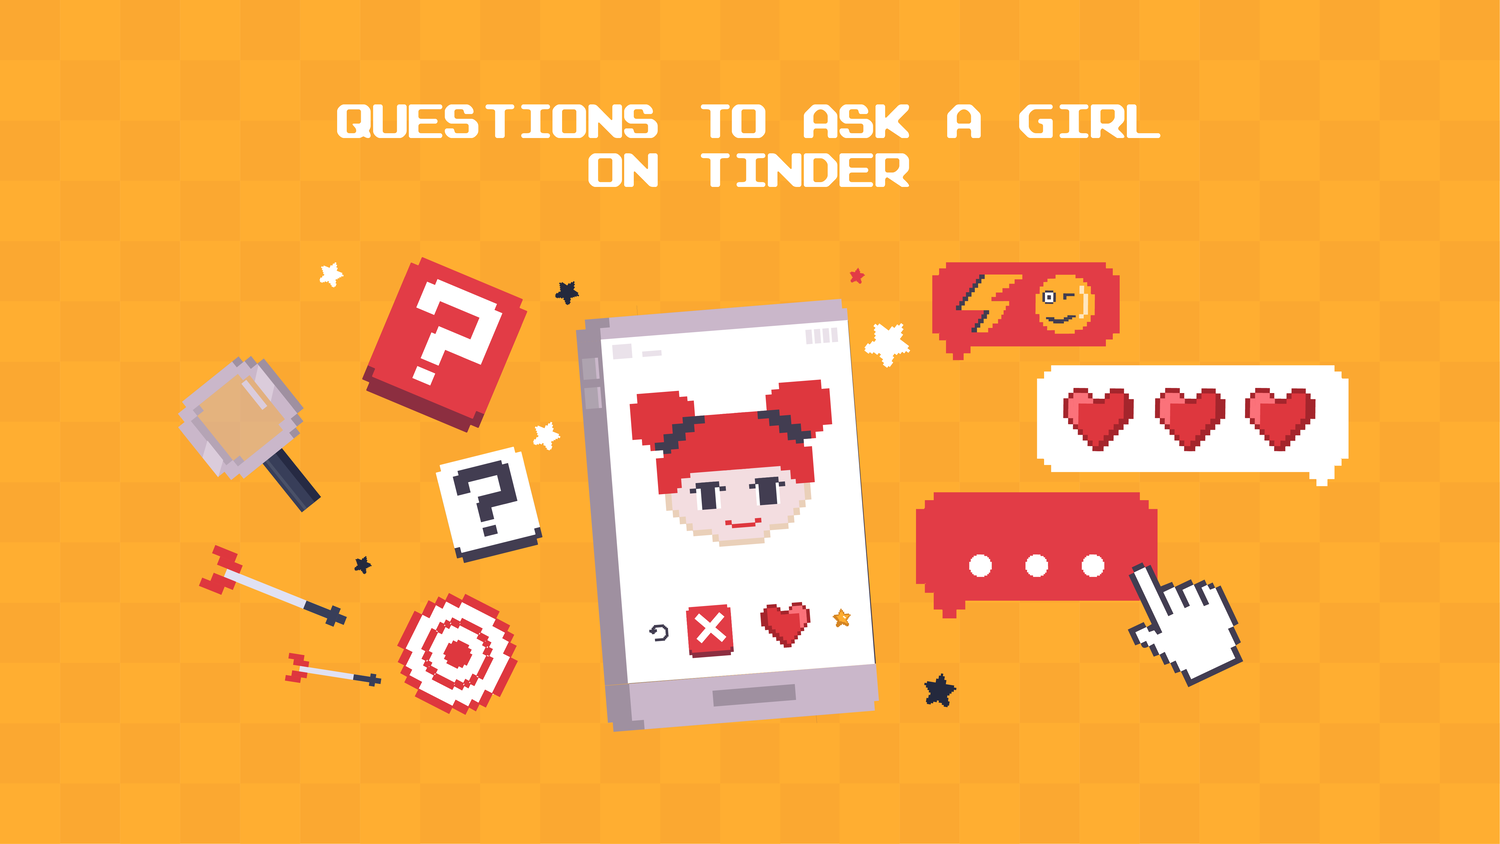 Girls tinder on to questions ask 71+ Questions